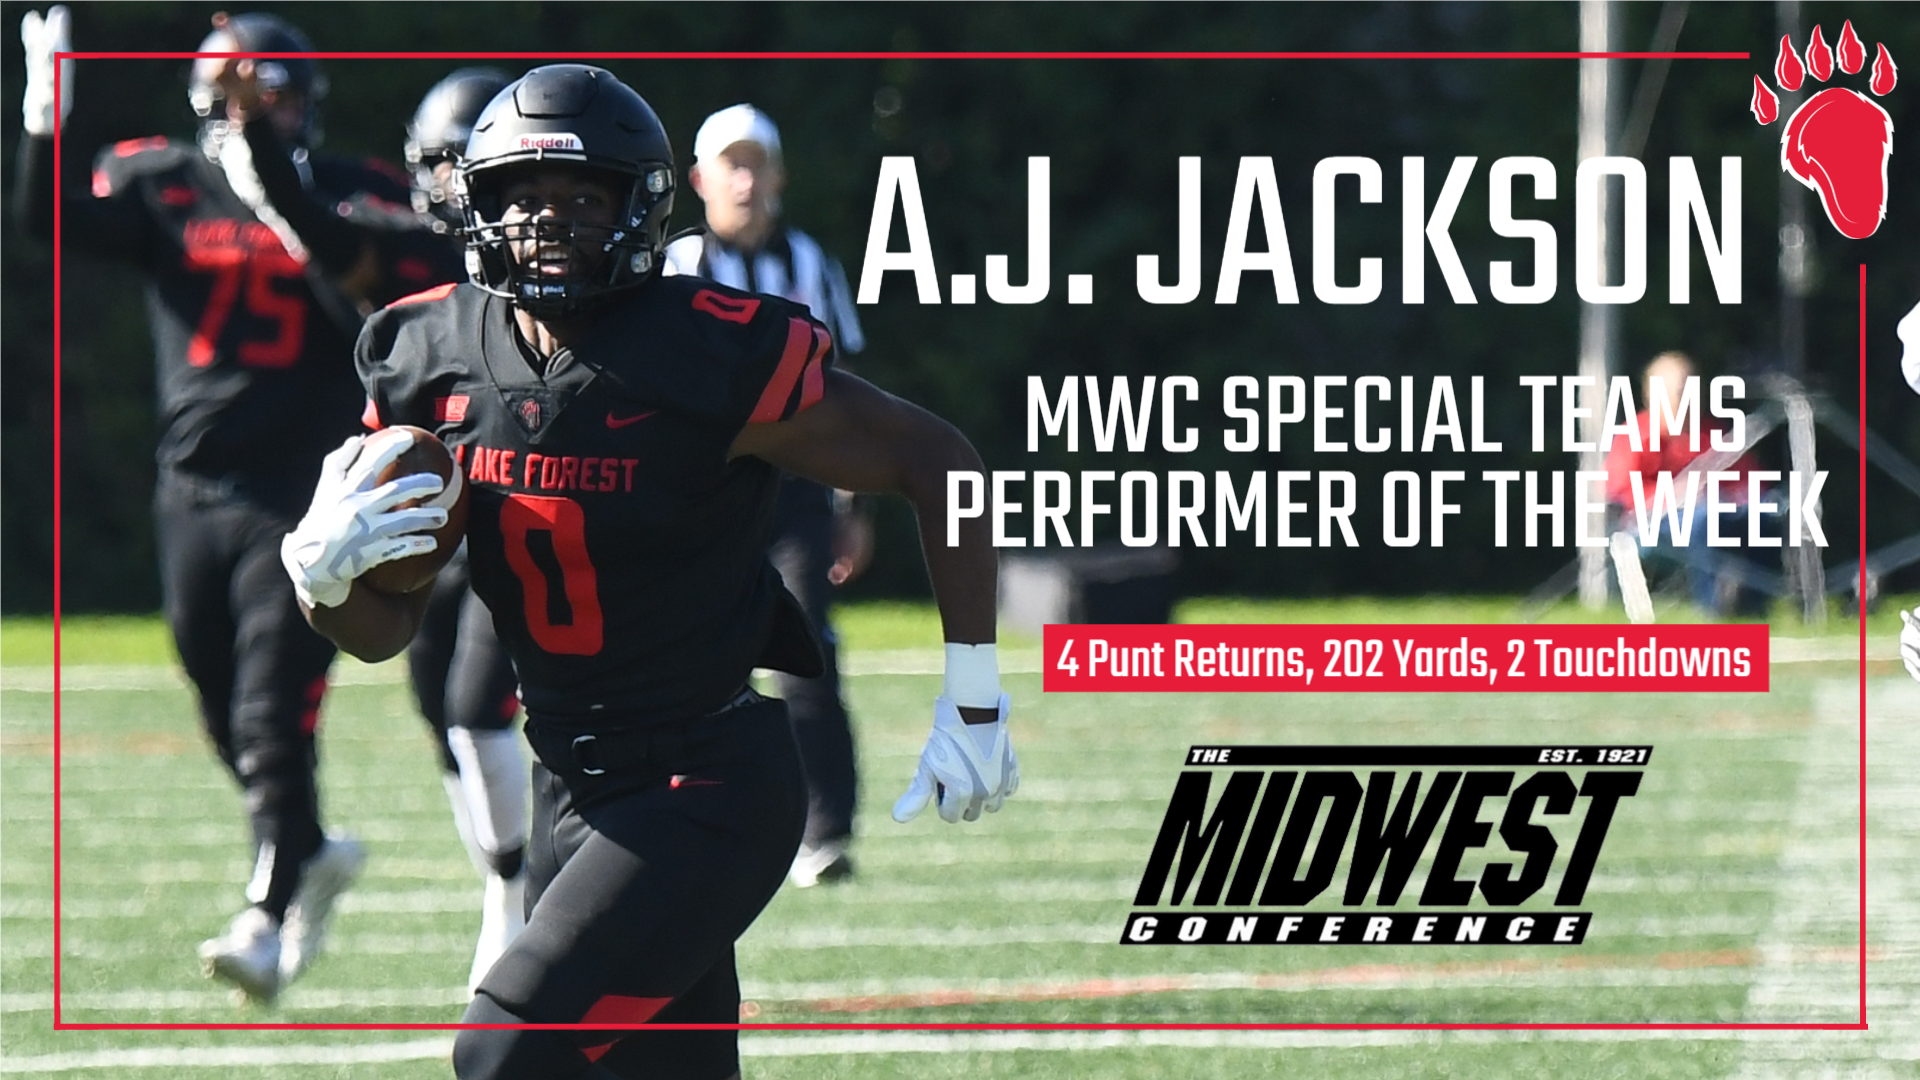 Fifth Career MWC Special Teams Performer of the Week Award for A.J. Jackson